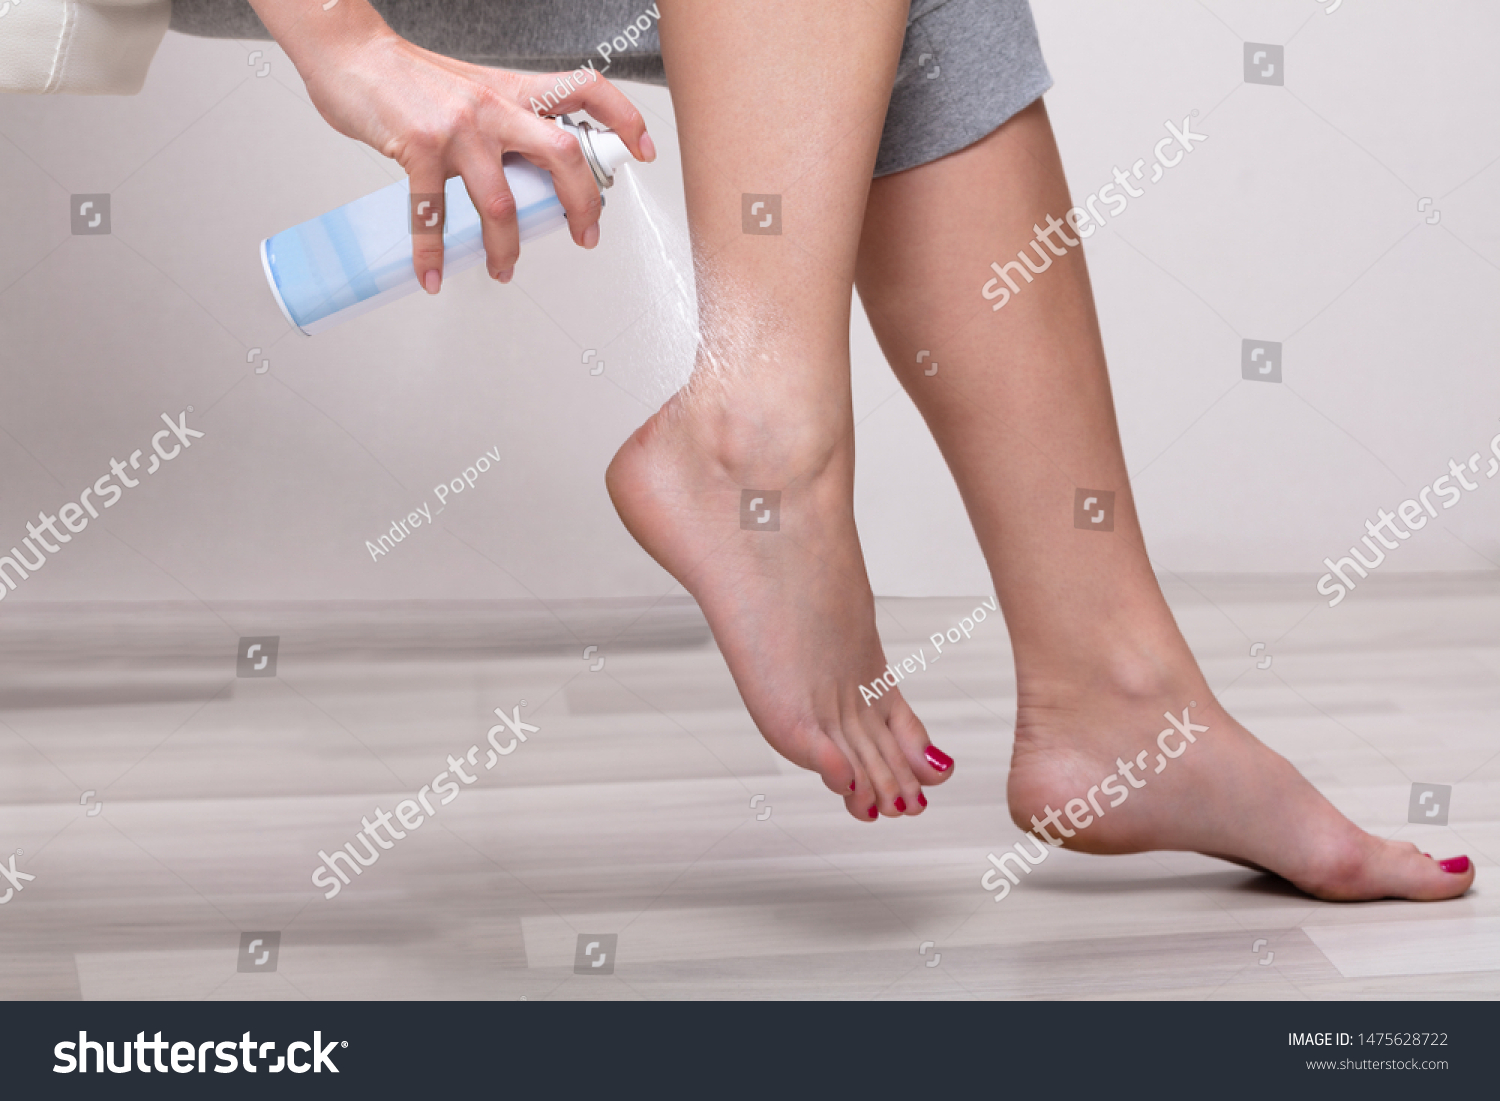 Low Section Of Woman's Hand Spraying Relief Spray On Her Foot At Home #1475628722